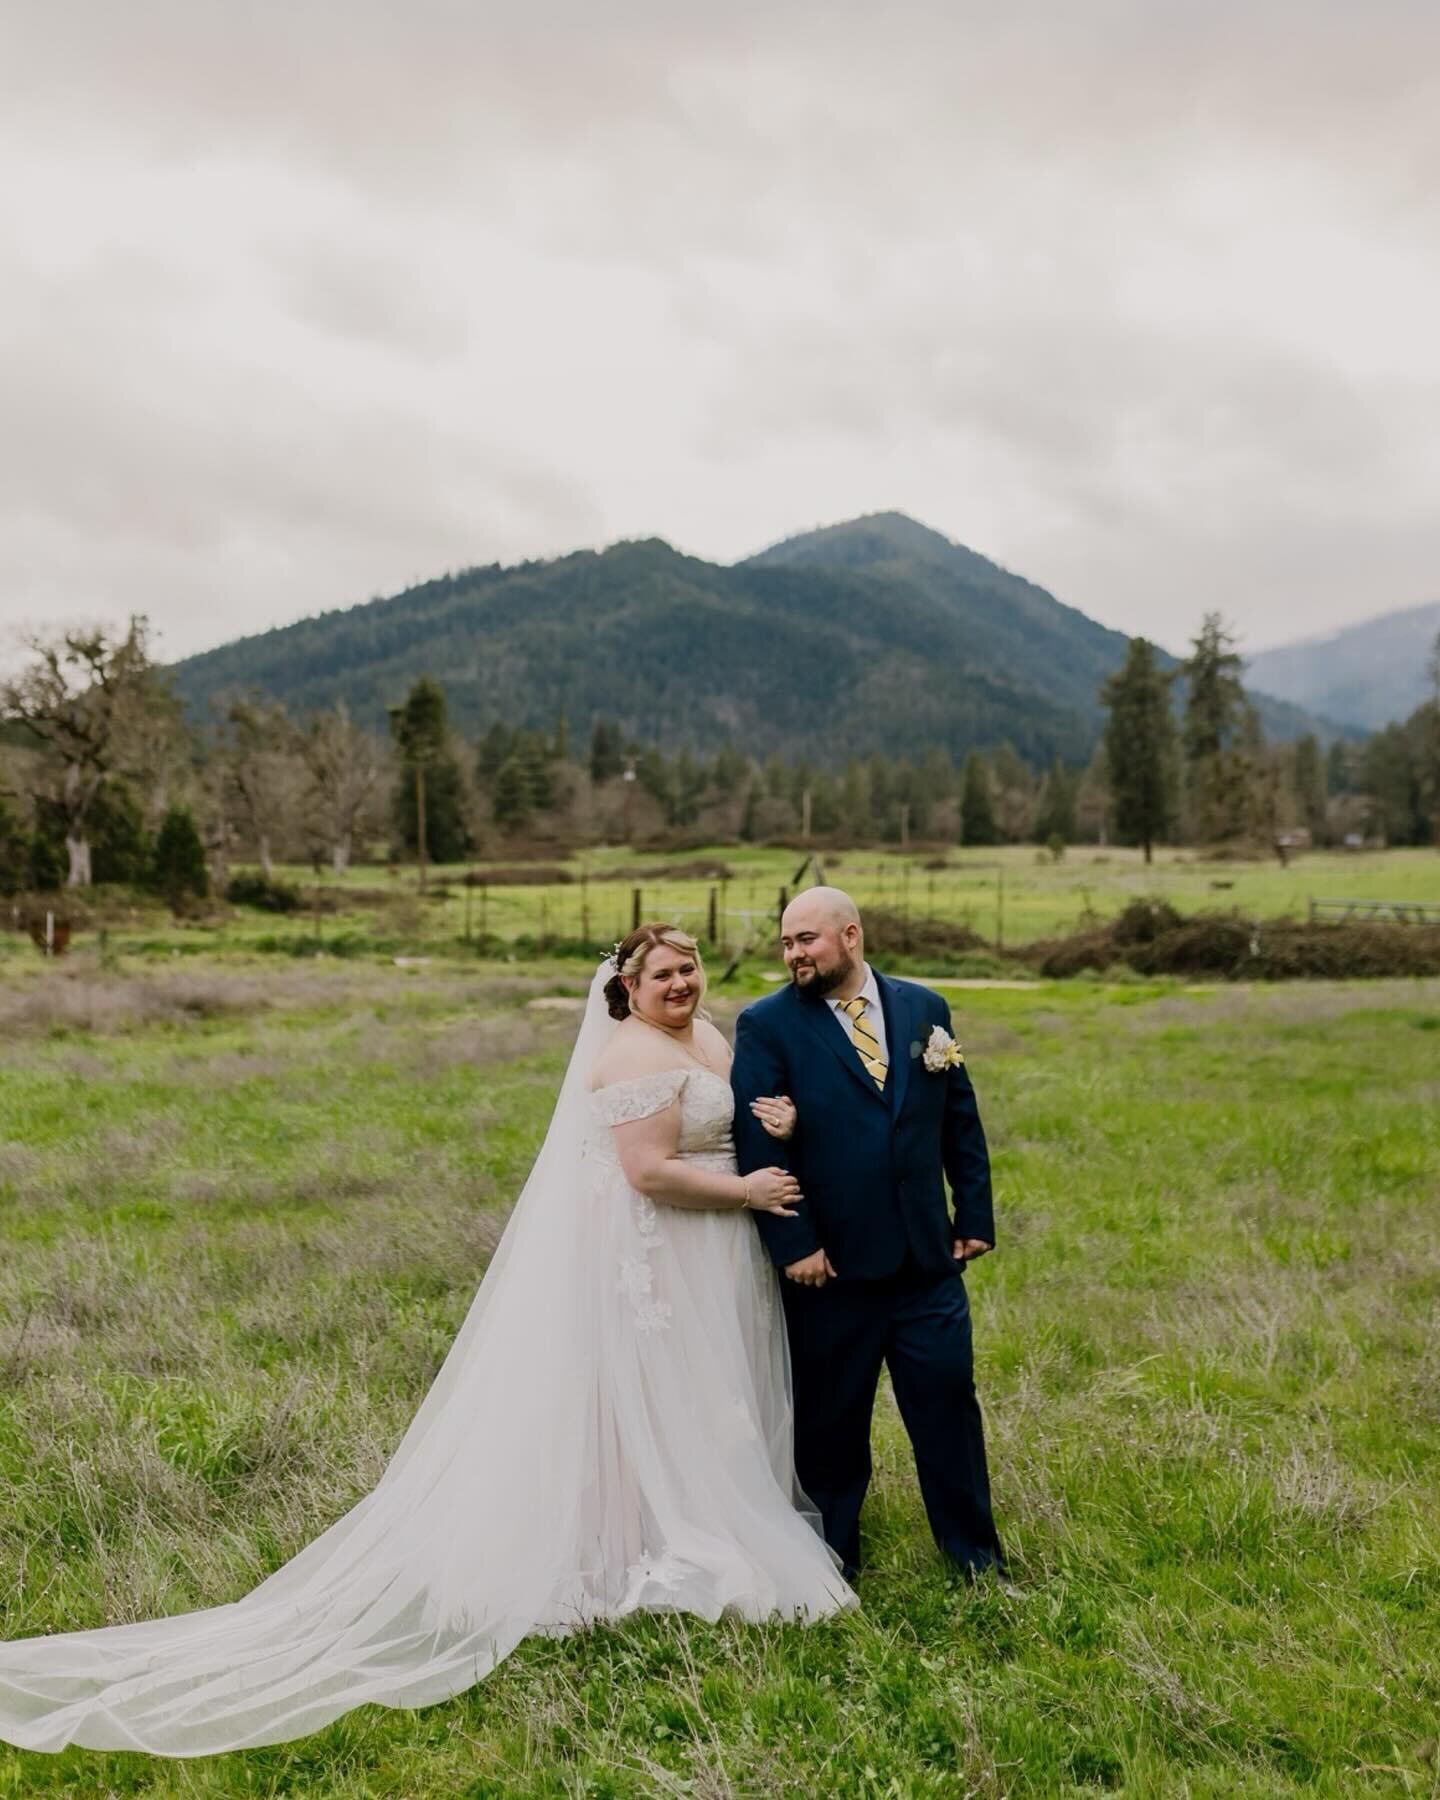 🌲✨ Capturing Love in the Heart of Nature! 📸💍

Just wrapped up an absolutely magical mountain woodsy wedding in Southern Oregon, and let me tell you, the scenery did not disappoint! From towering pines to babbling brooks, every moment felt like som